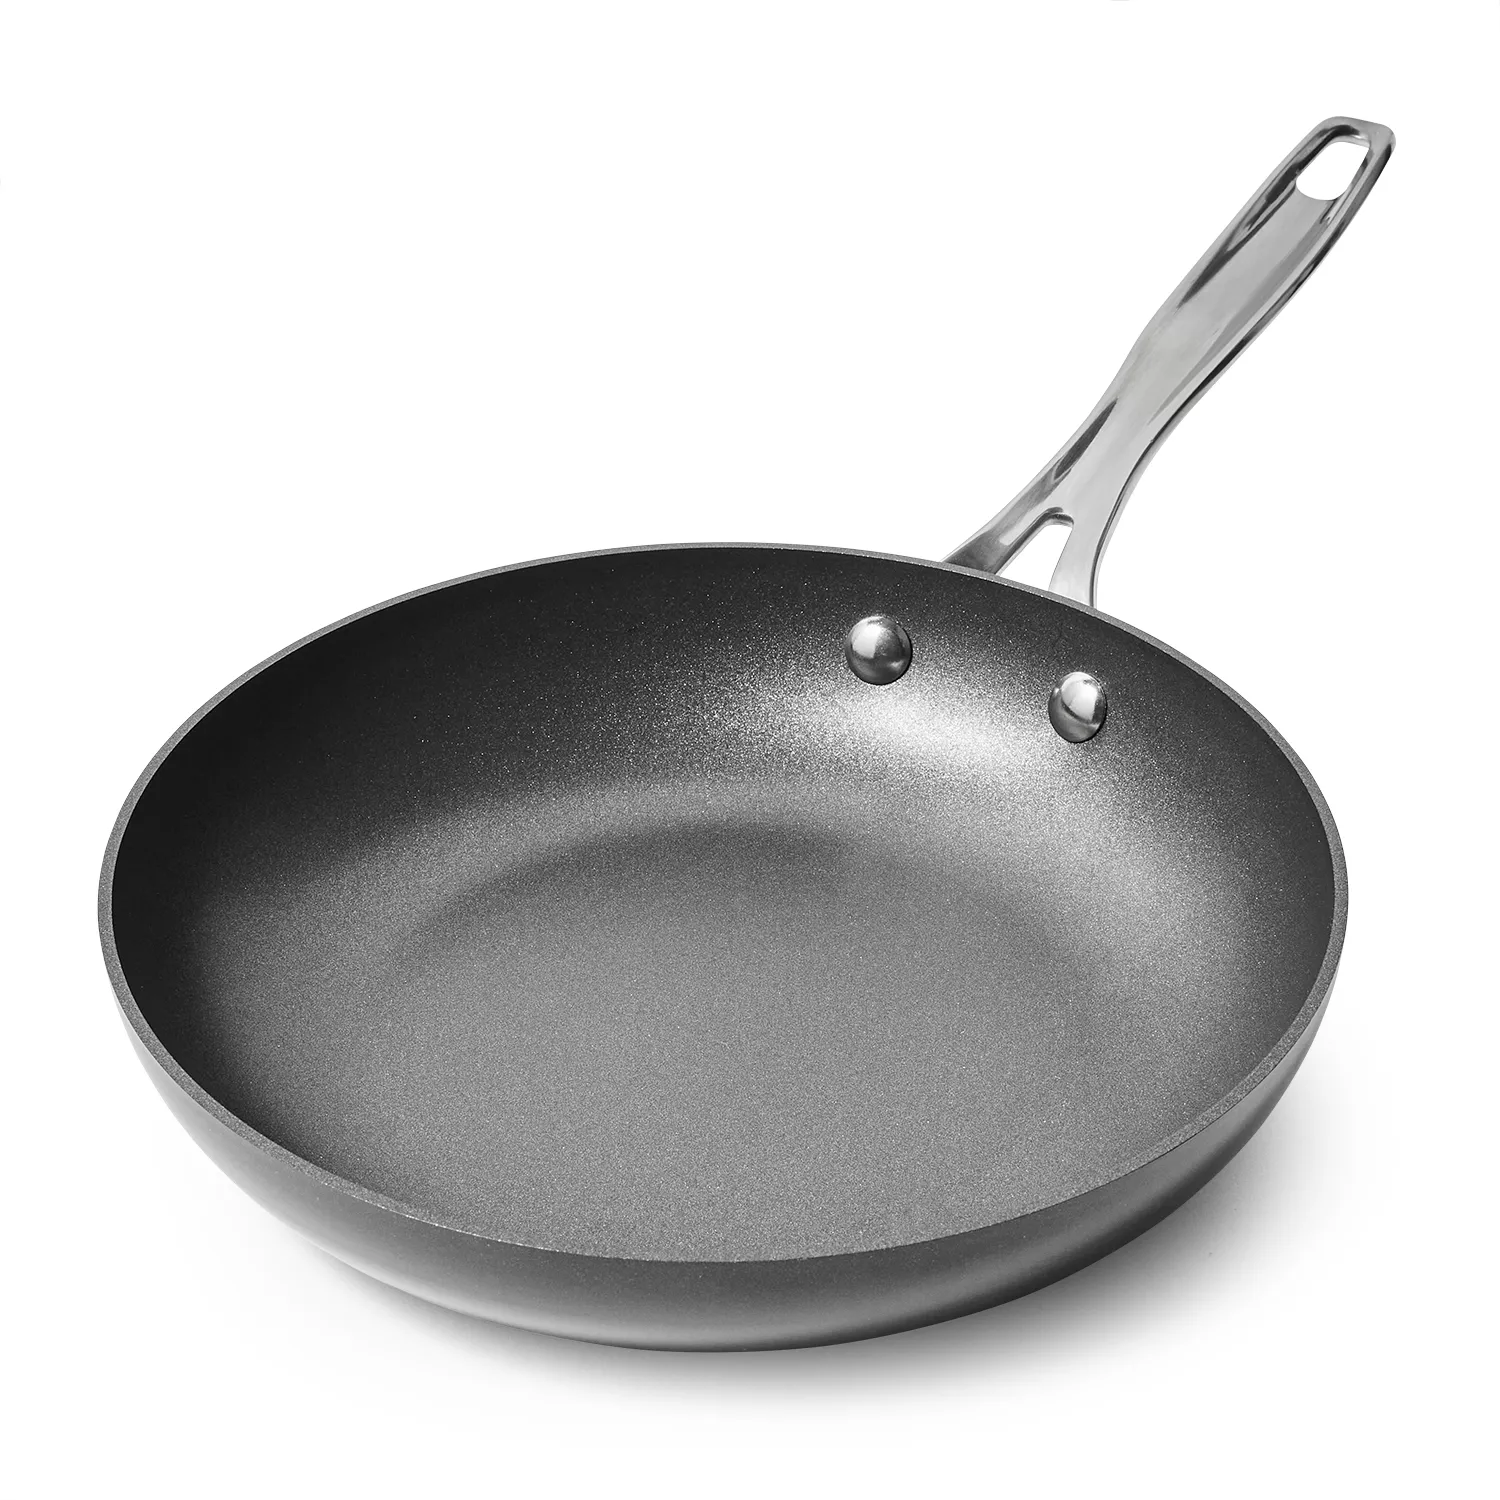 Premier™ Hard-Anodized Nonstick Frying Pan Set, 8-Inch and 10-Inch